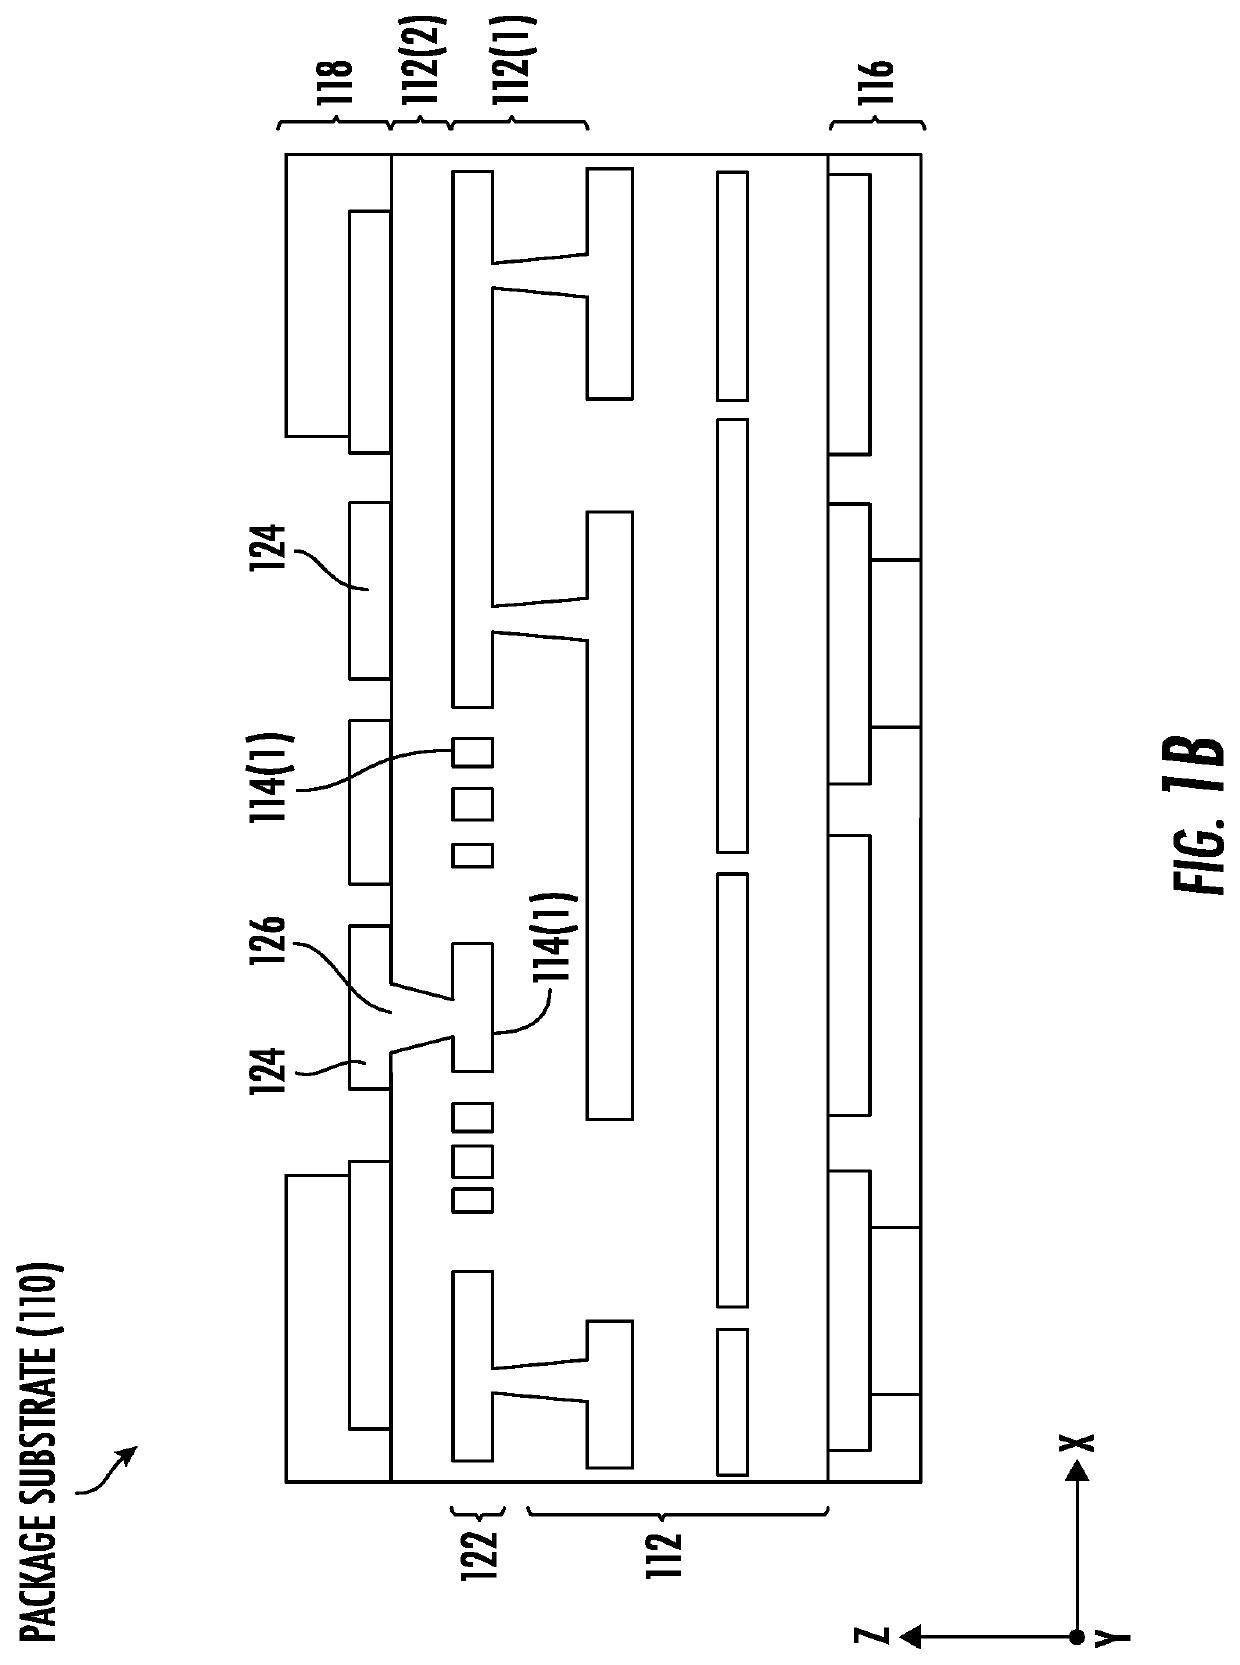 Integrated circuit (IC) package substrate with embedded trace substrate (ETS) layer on a substrate, and related fabrication methods